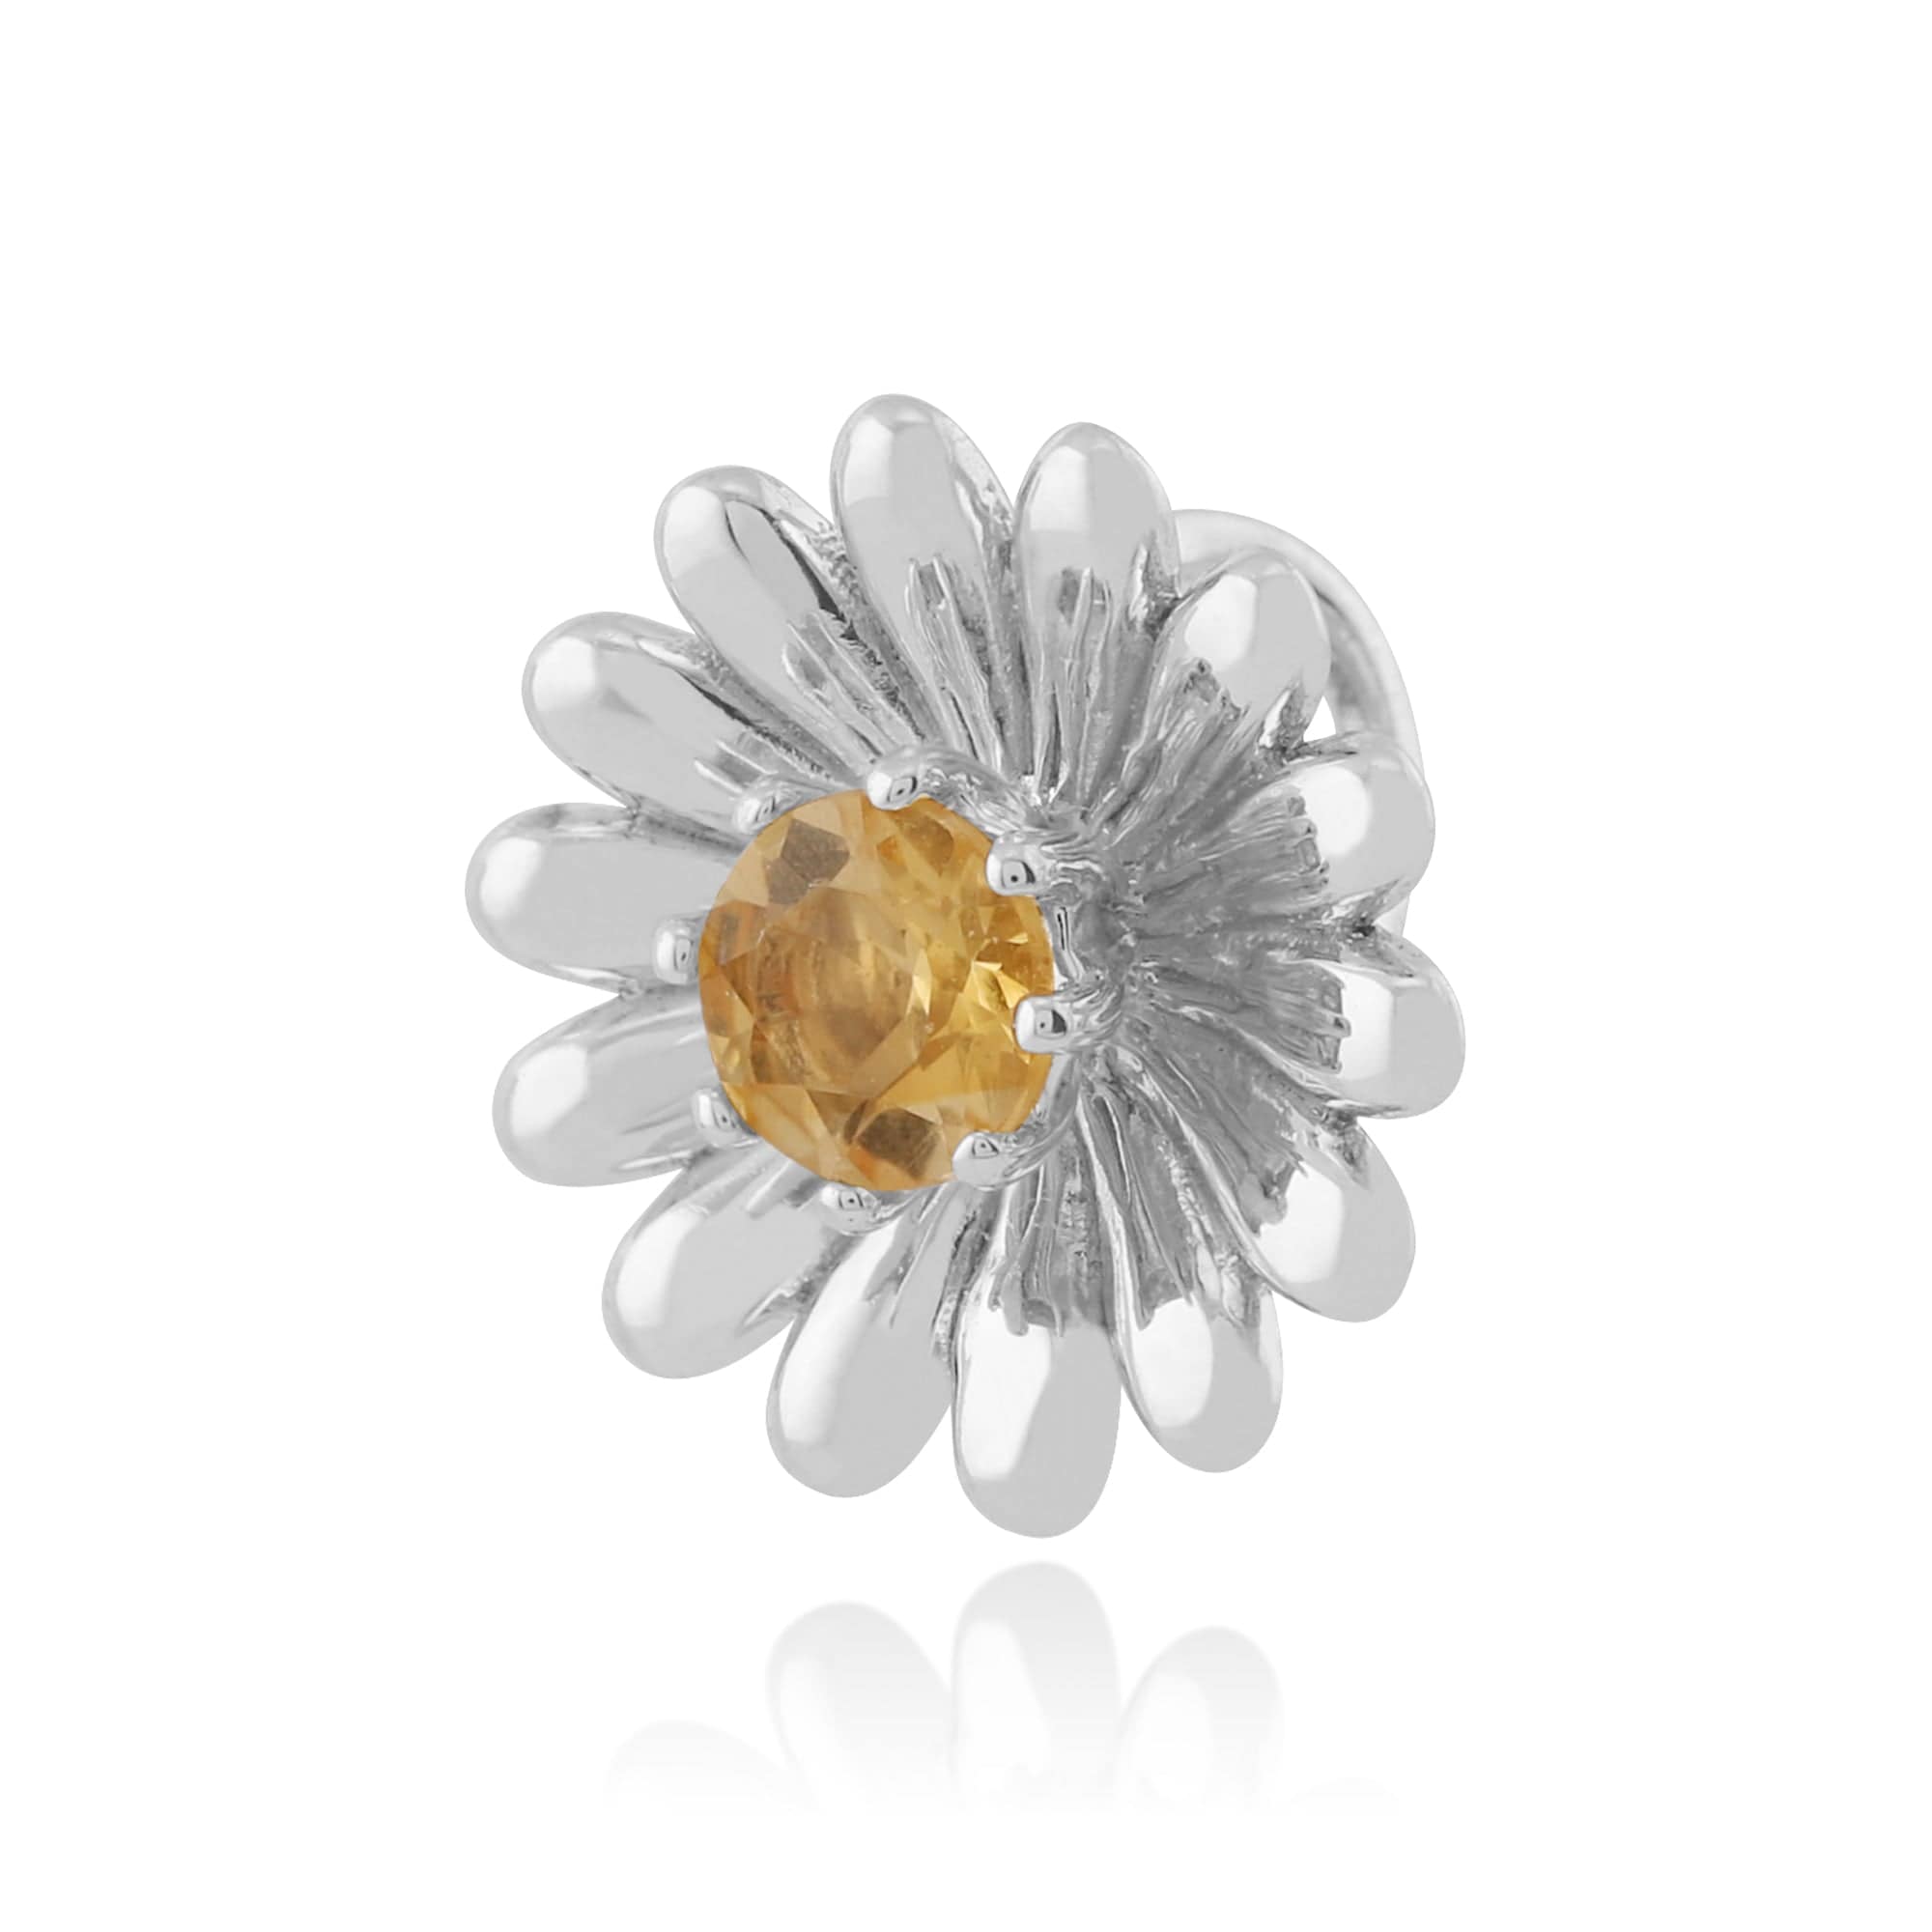 270P021601925 Floral Round Citrine Daisy Flower Single Stone Pendant in 925 Sterling Silver 2